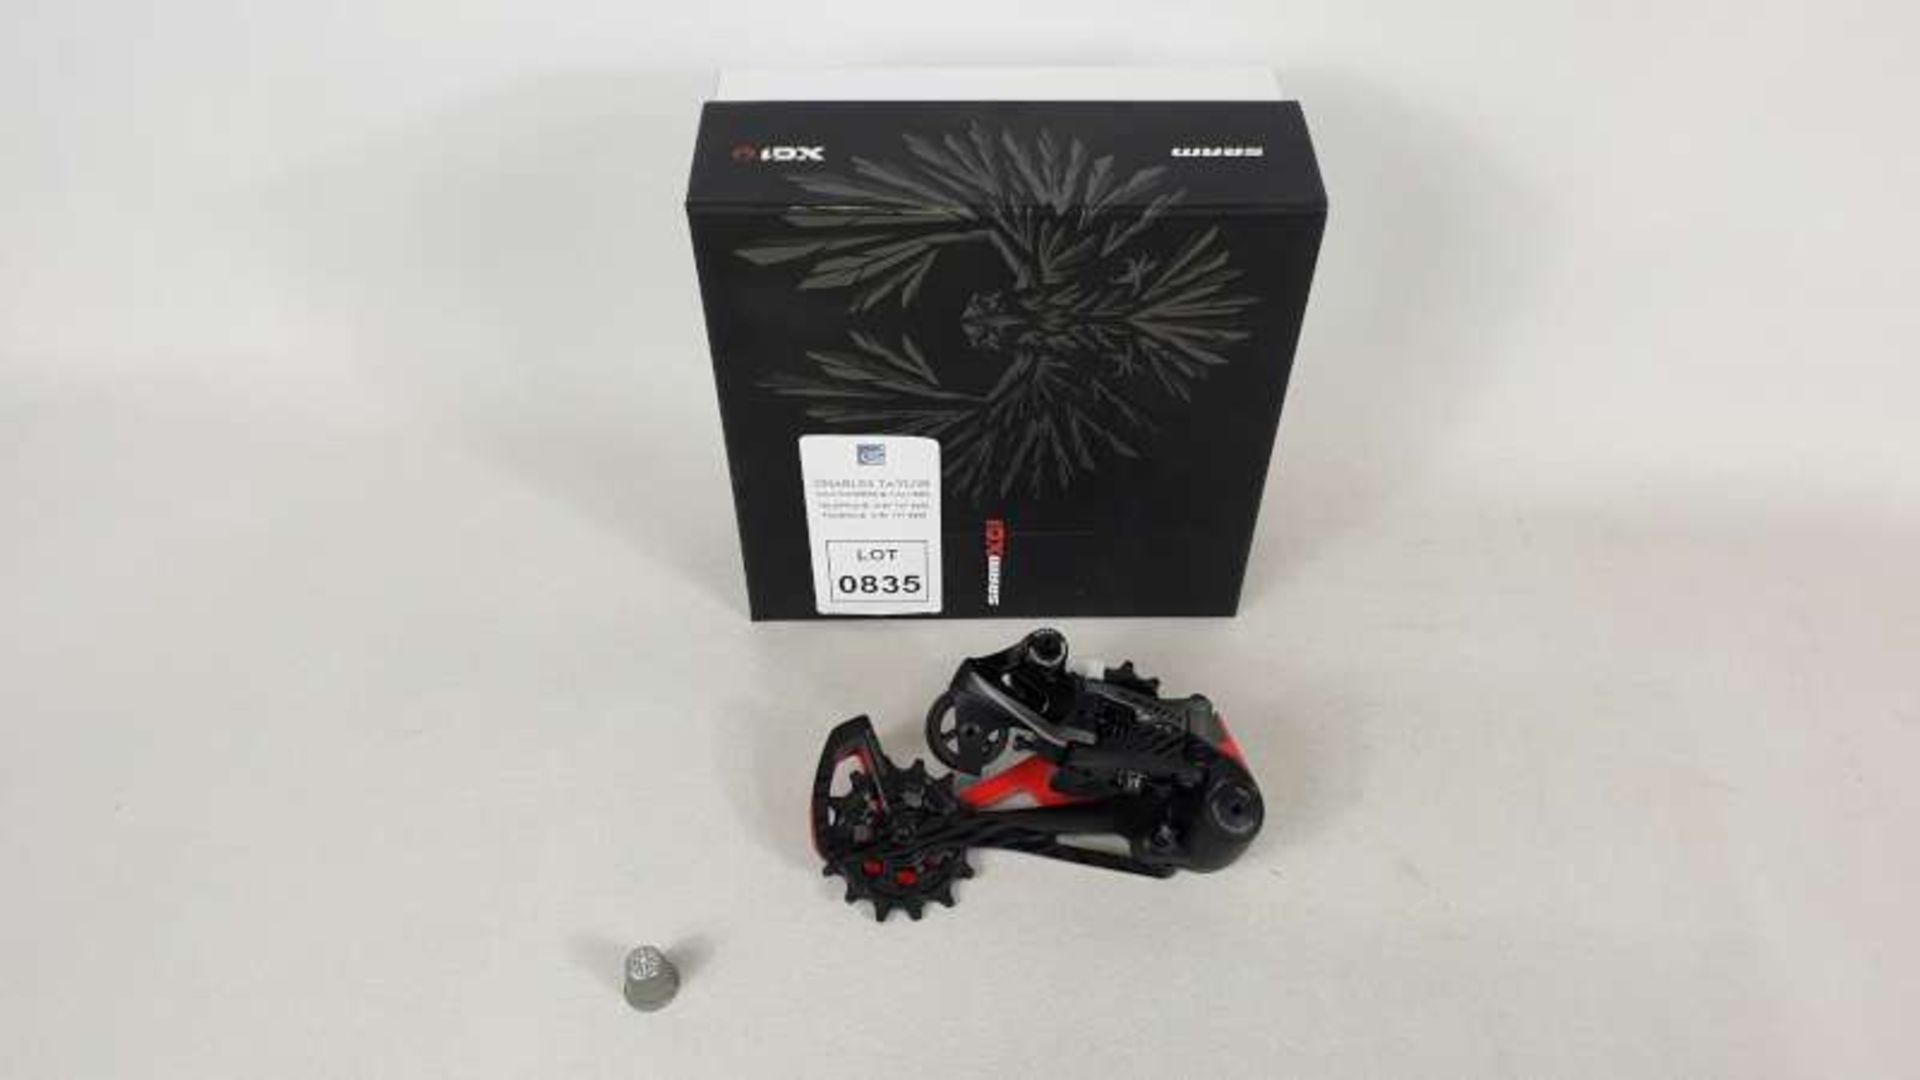 BRAND NEW BOXED SRAM AMRD X01 EAGLE TYPE 3.0 12 SPEED RED